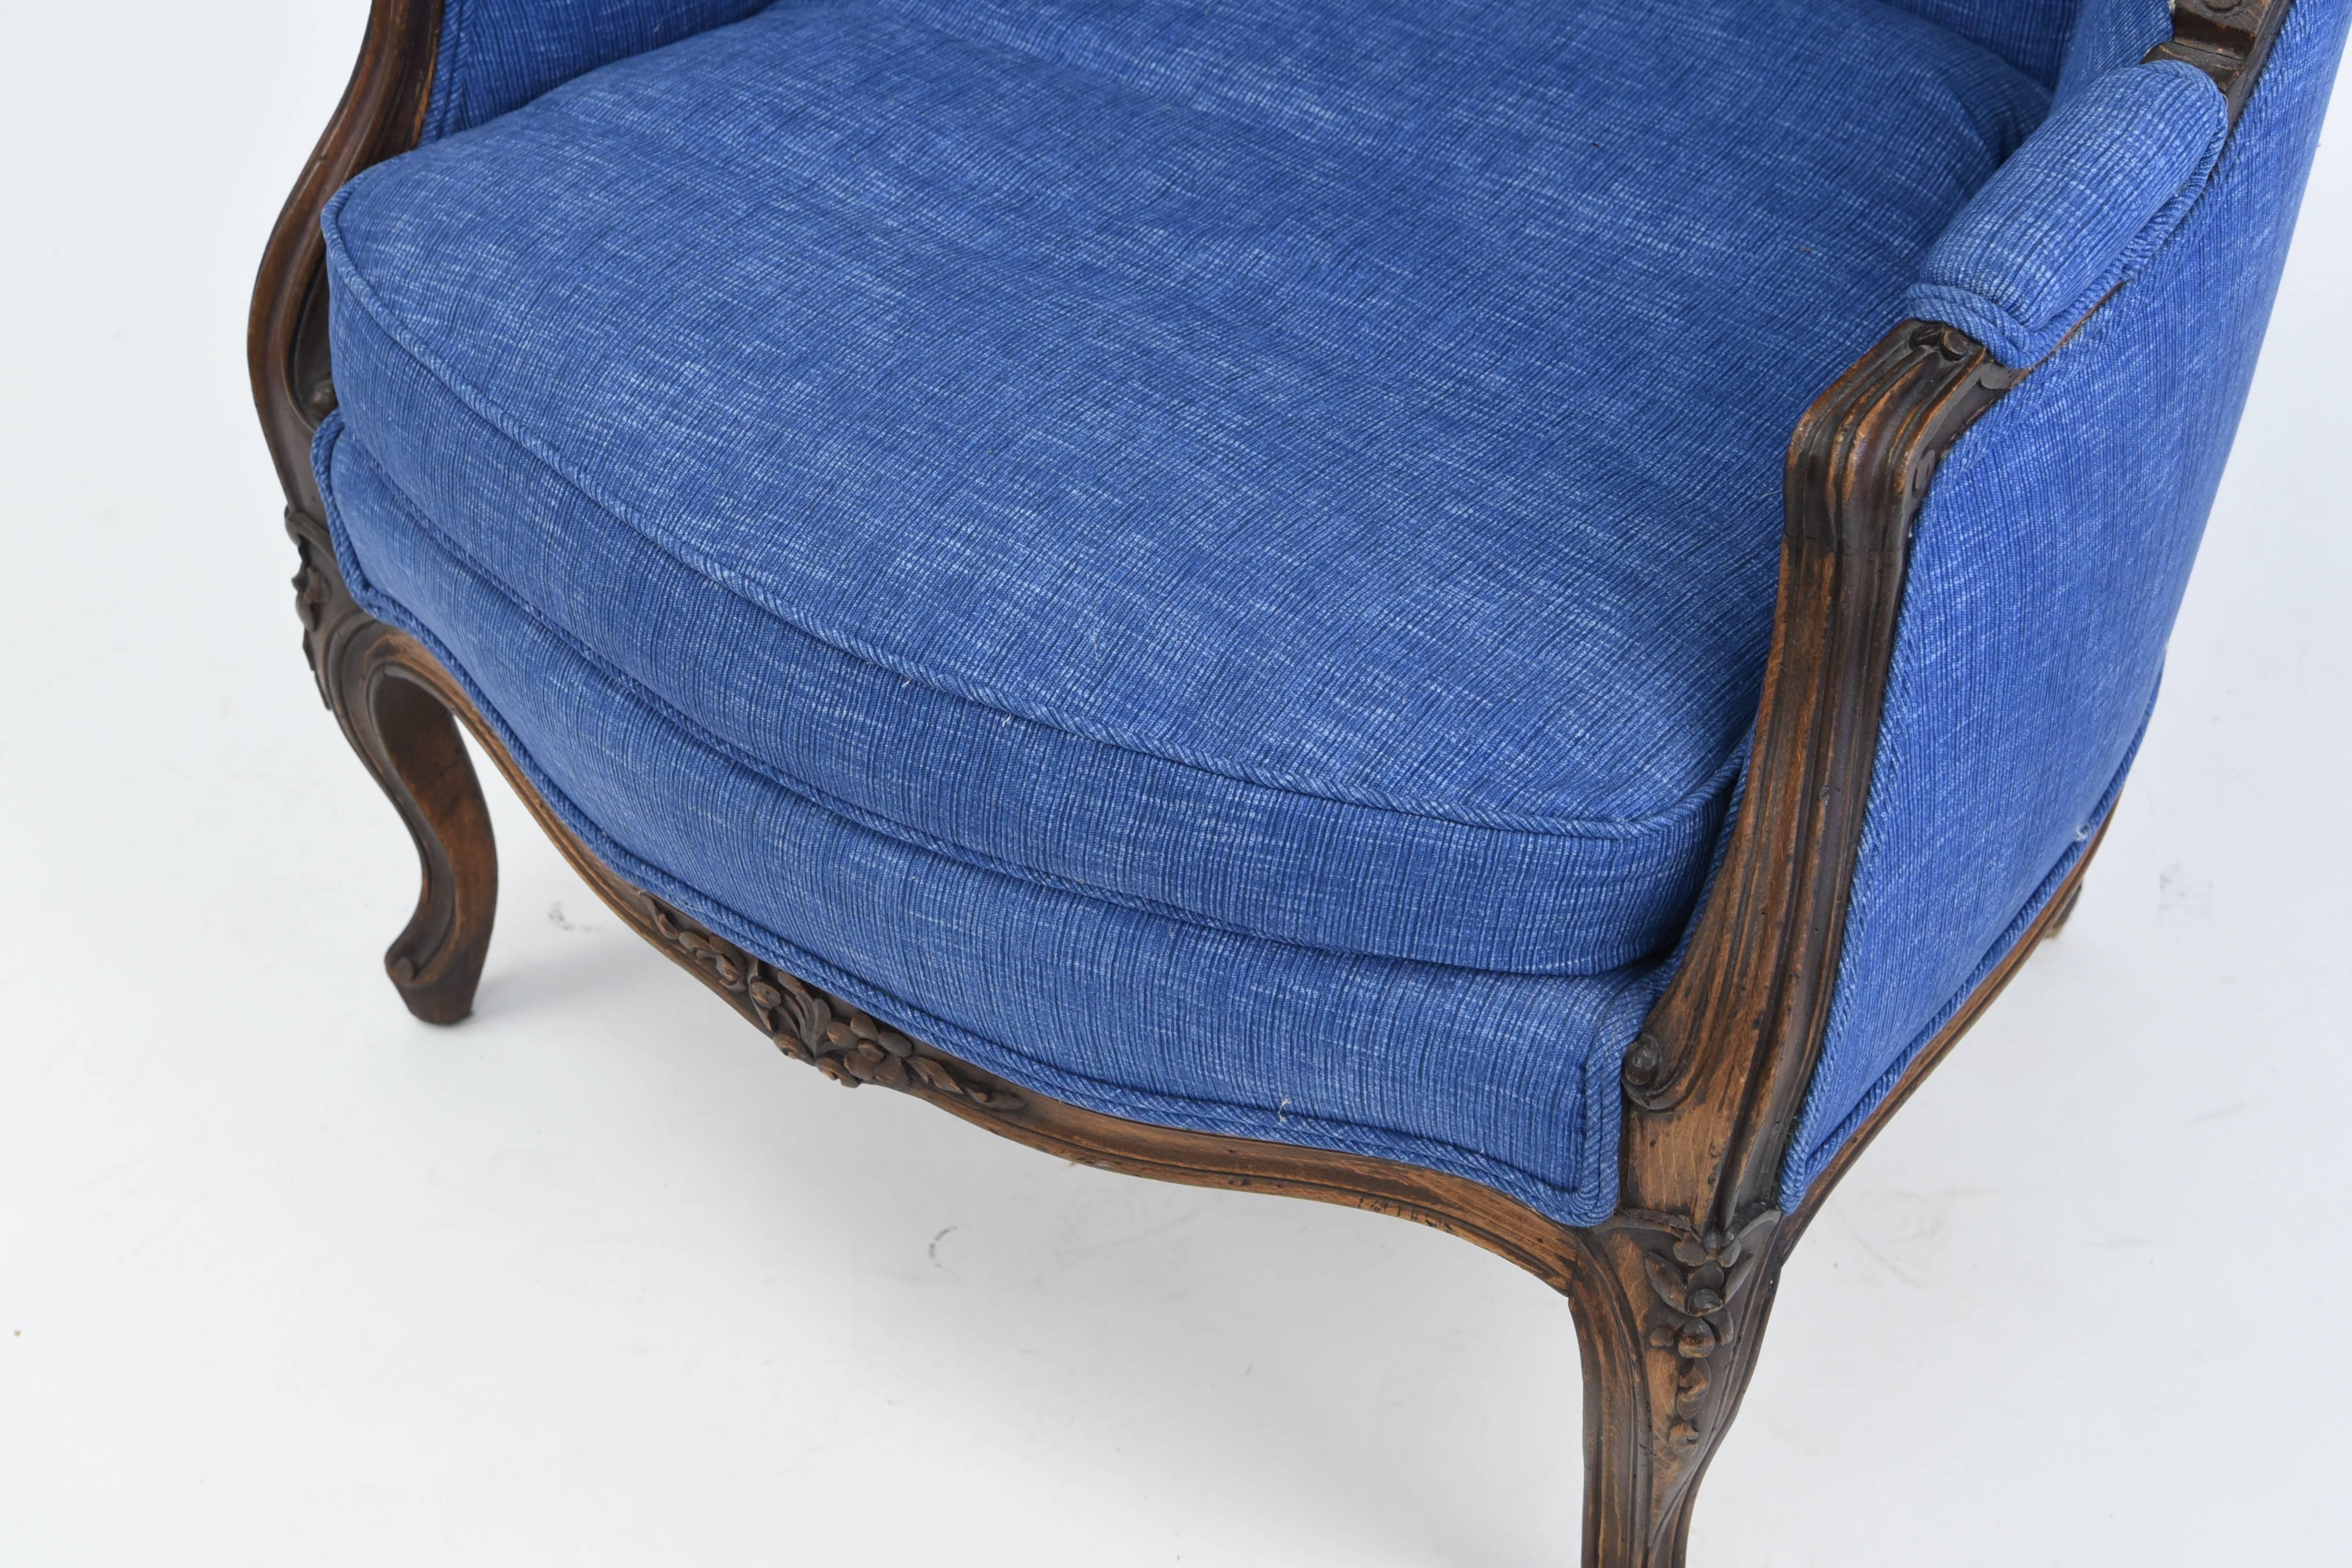 In a newer upholstery job this vintage French style balloon canopy back chair will be the accent to any room!